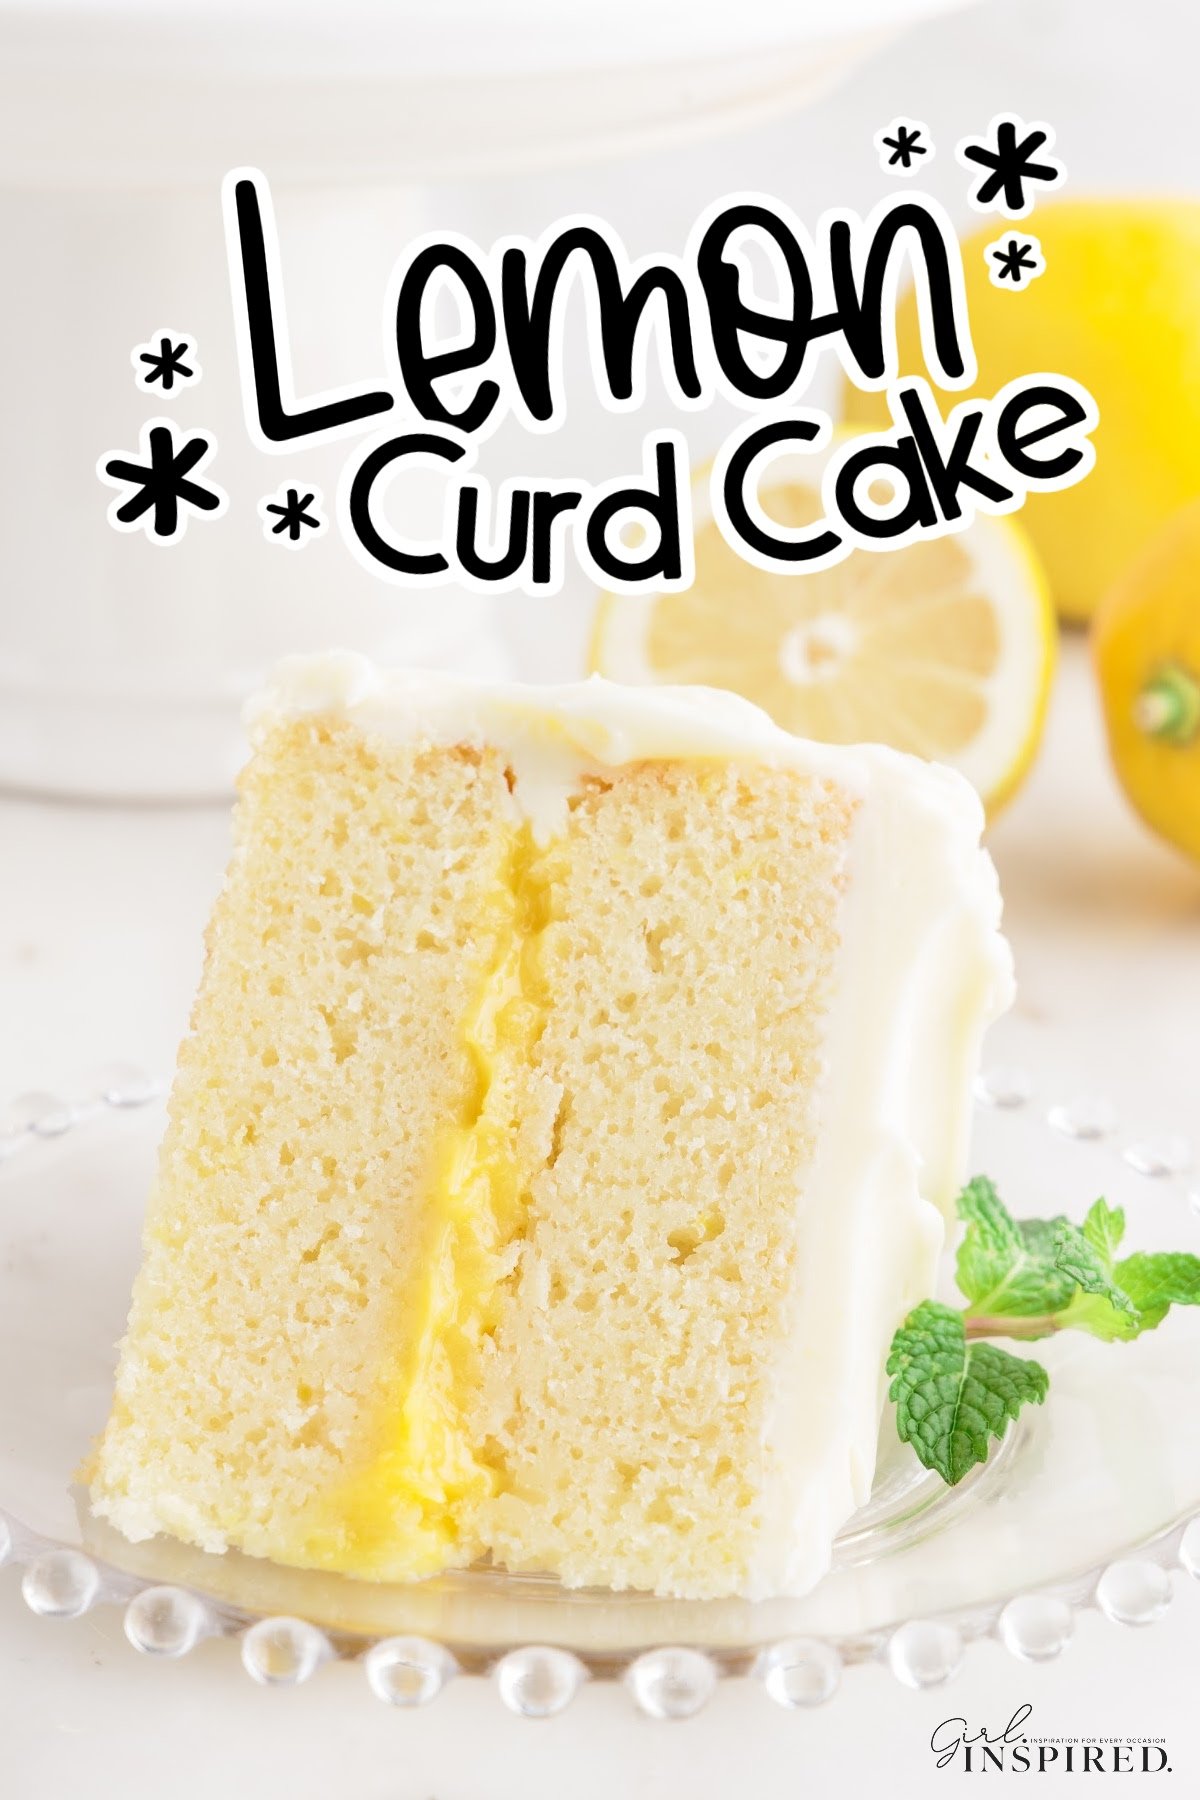 A slice of Lemon Curd Cake on a plate with text overlay.